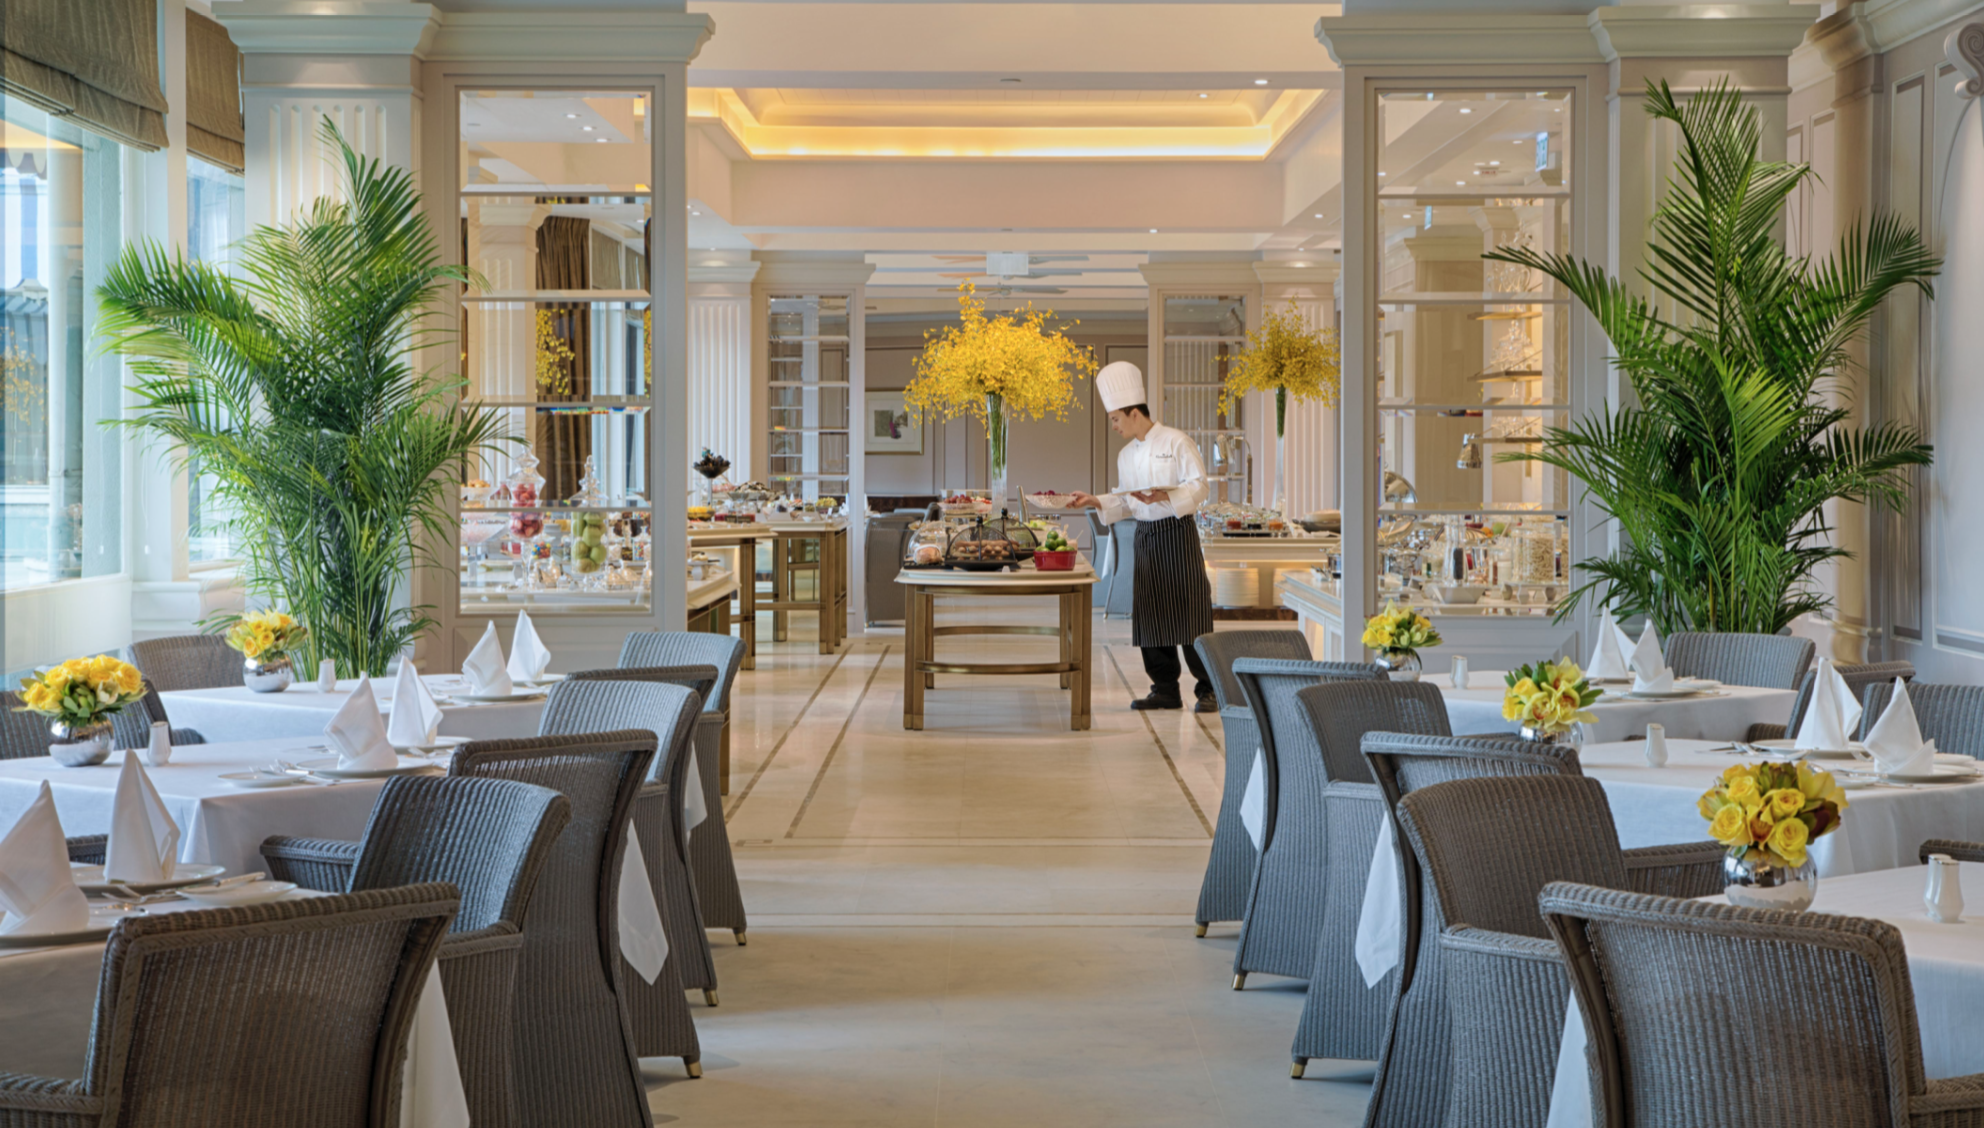 Activating Data to Recapture the Magic of Hospitality at The Peninsula Hotel